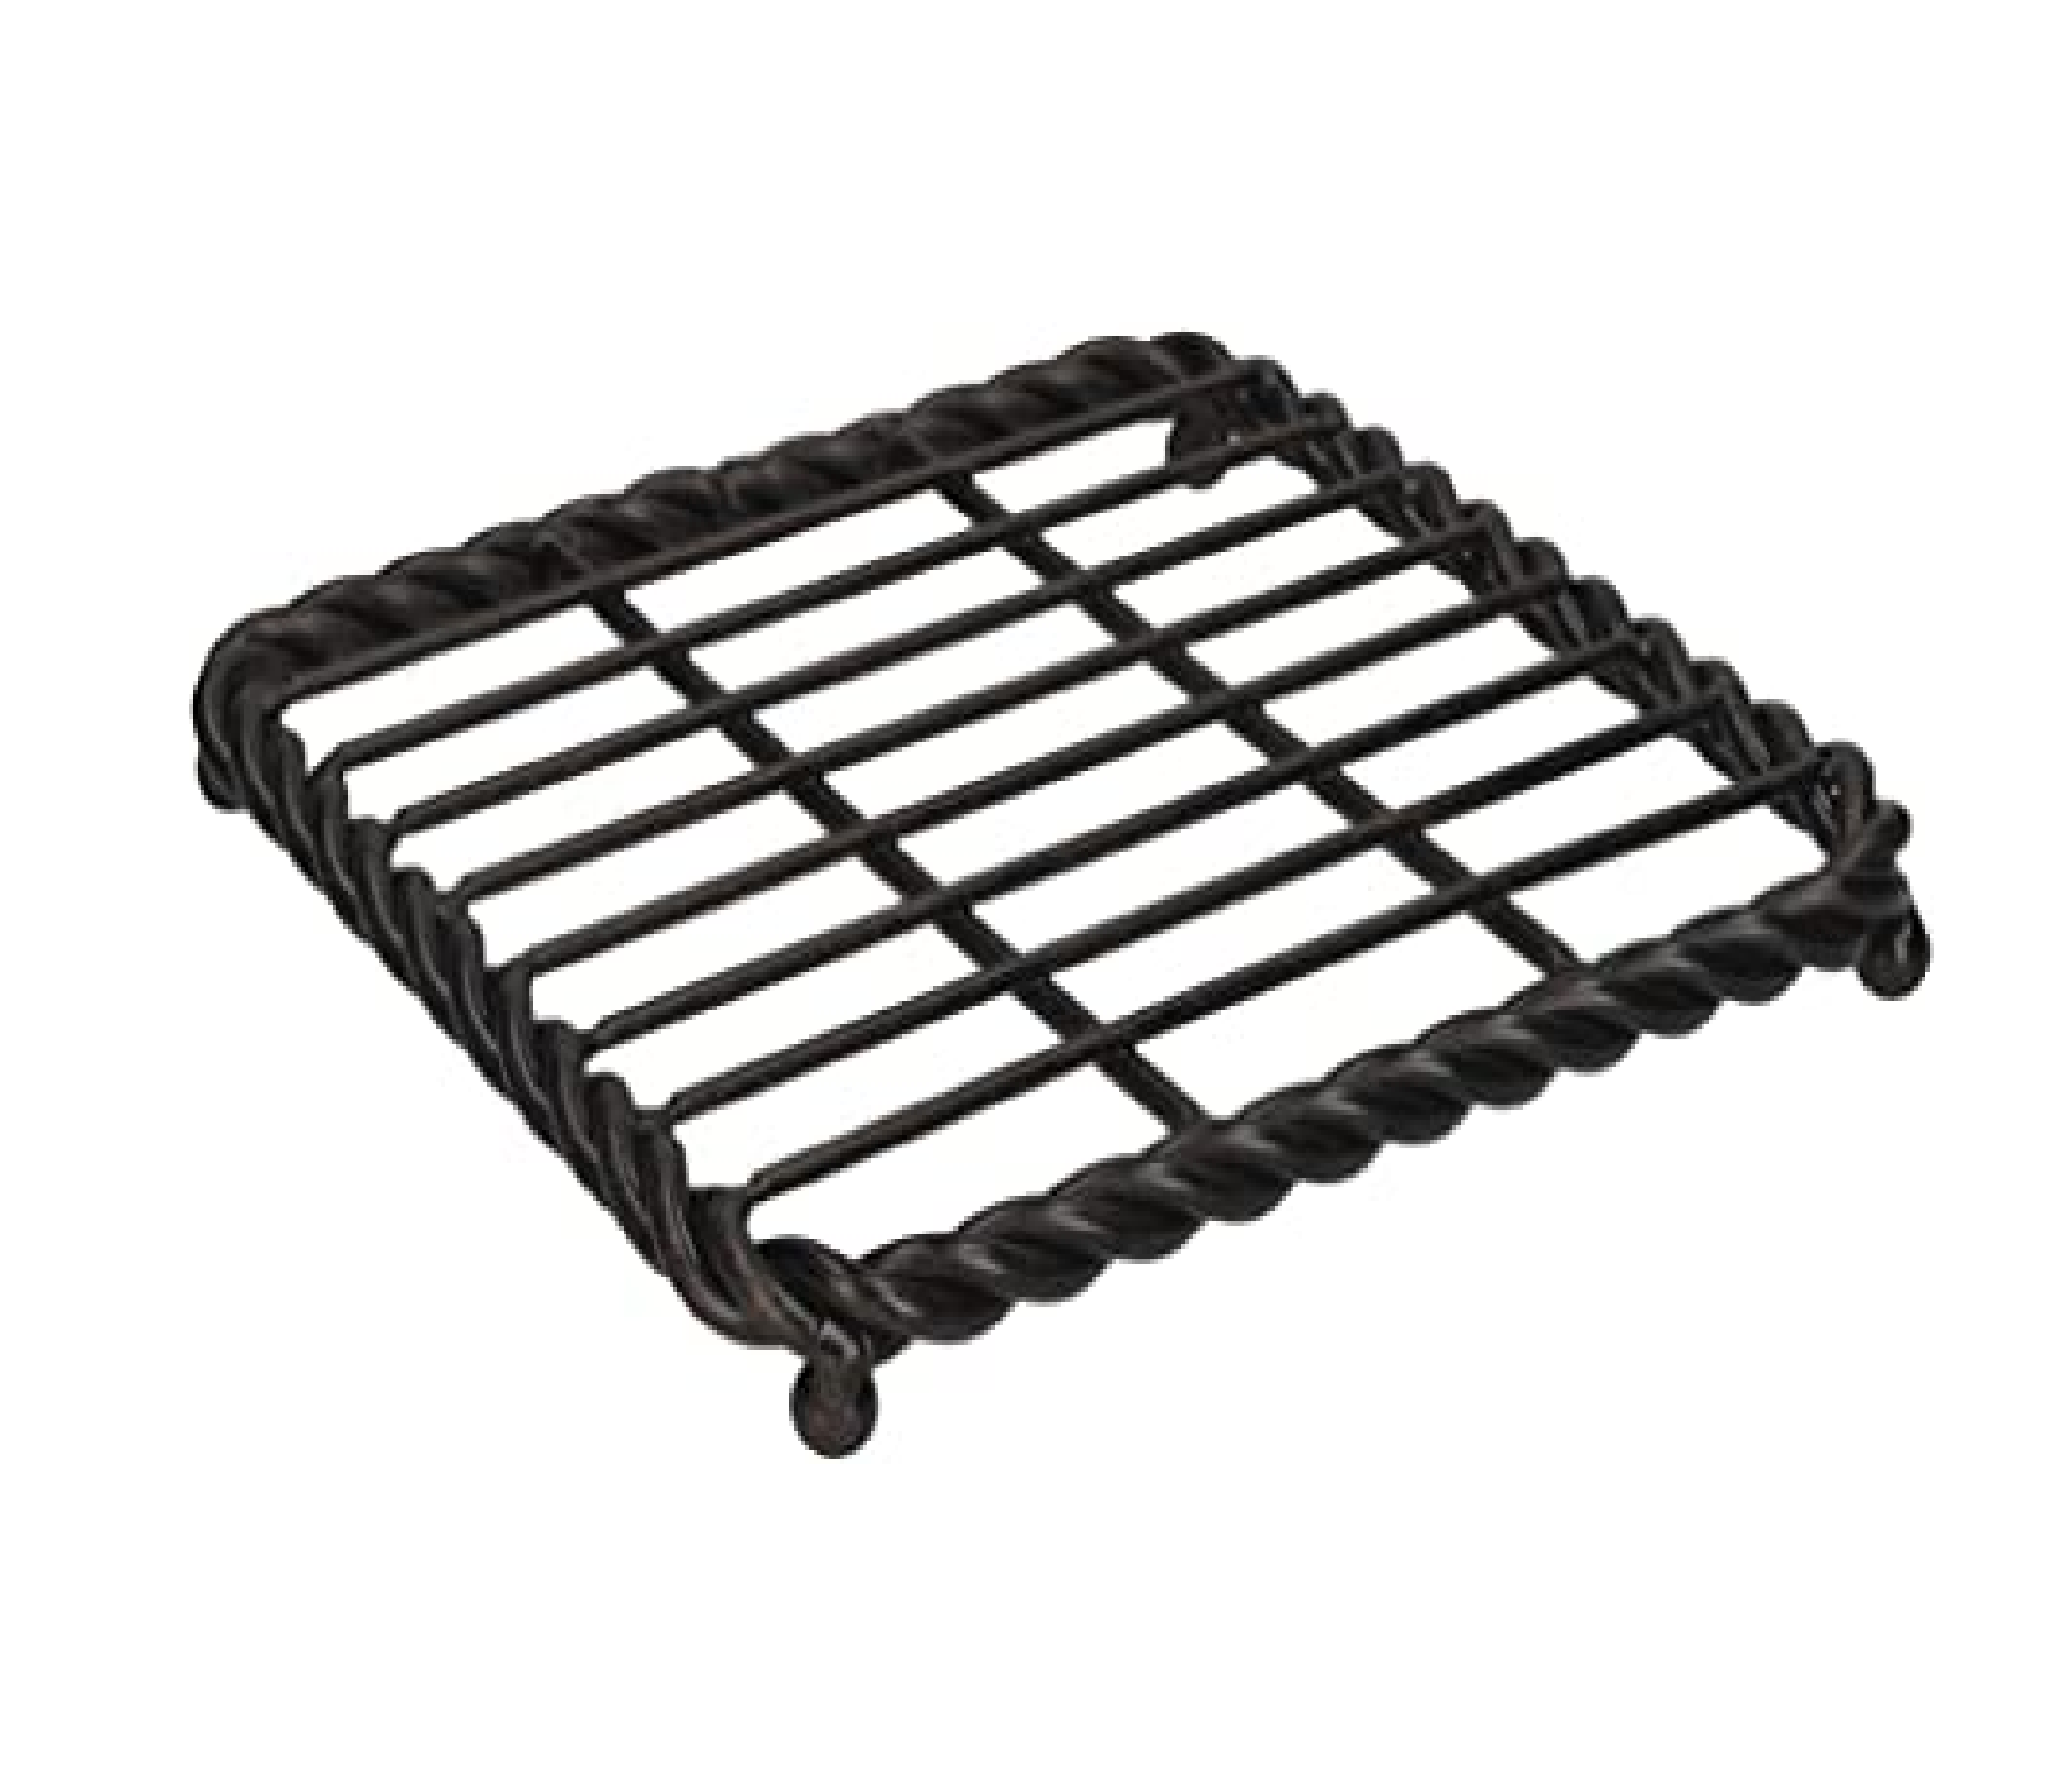 MIKASA GOURMET TRIVET FOR HOT PANS WITH ROPE DETAILING, WIRE, BLACK, 17.5 CM